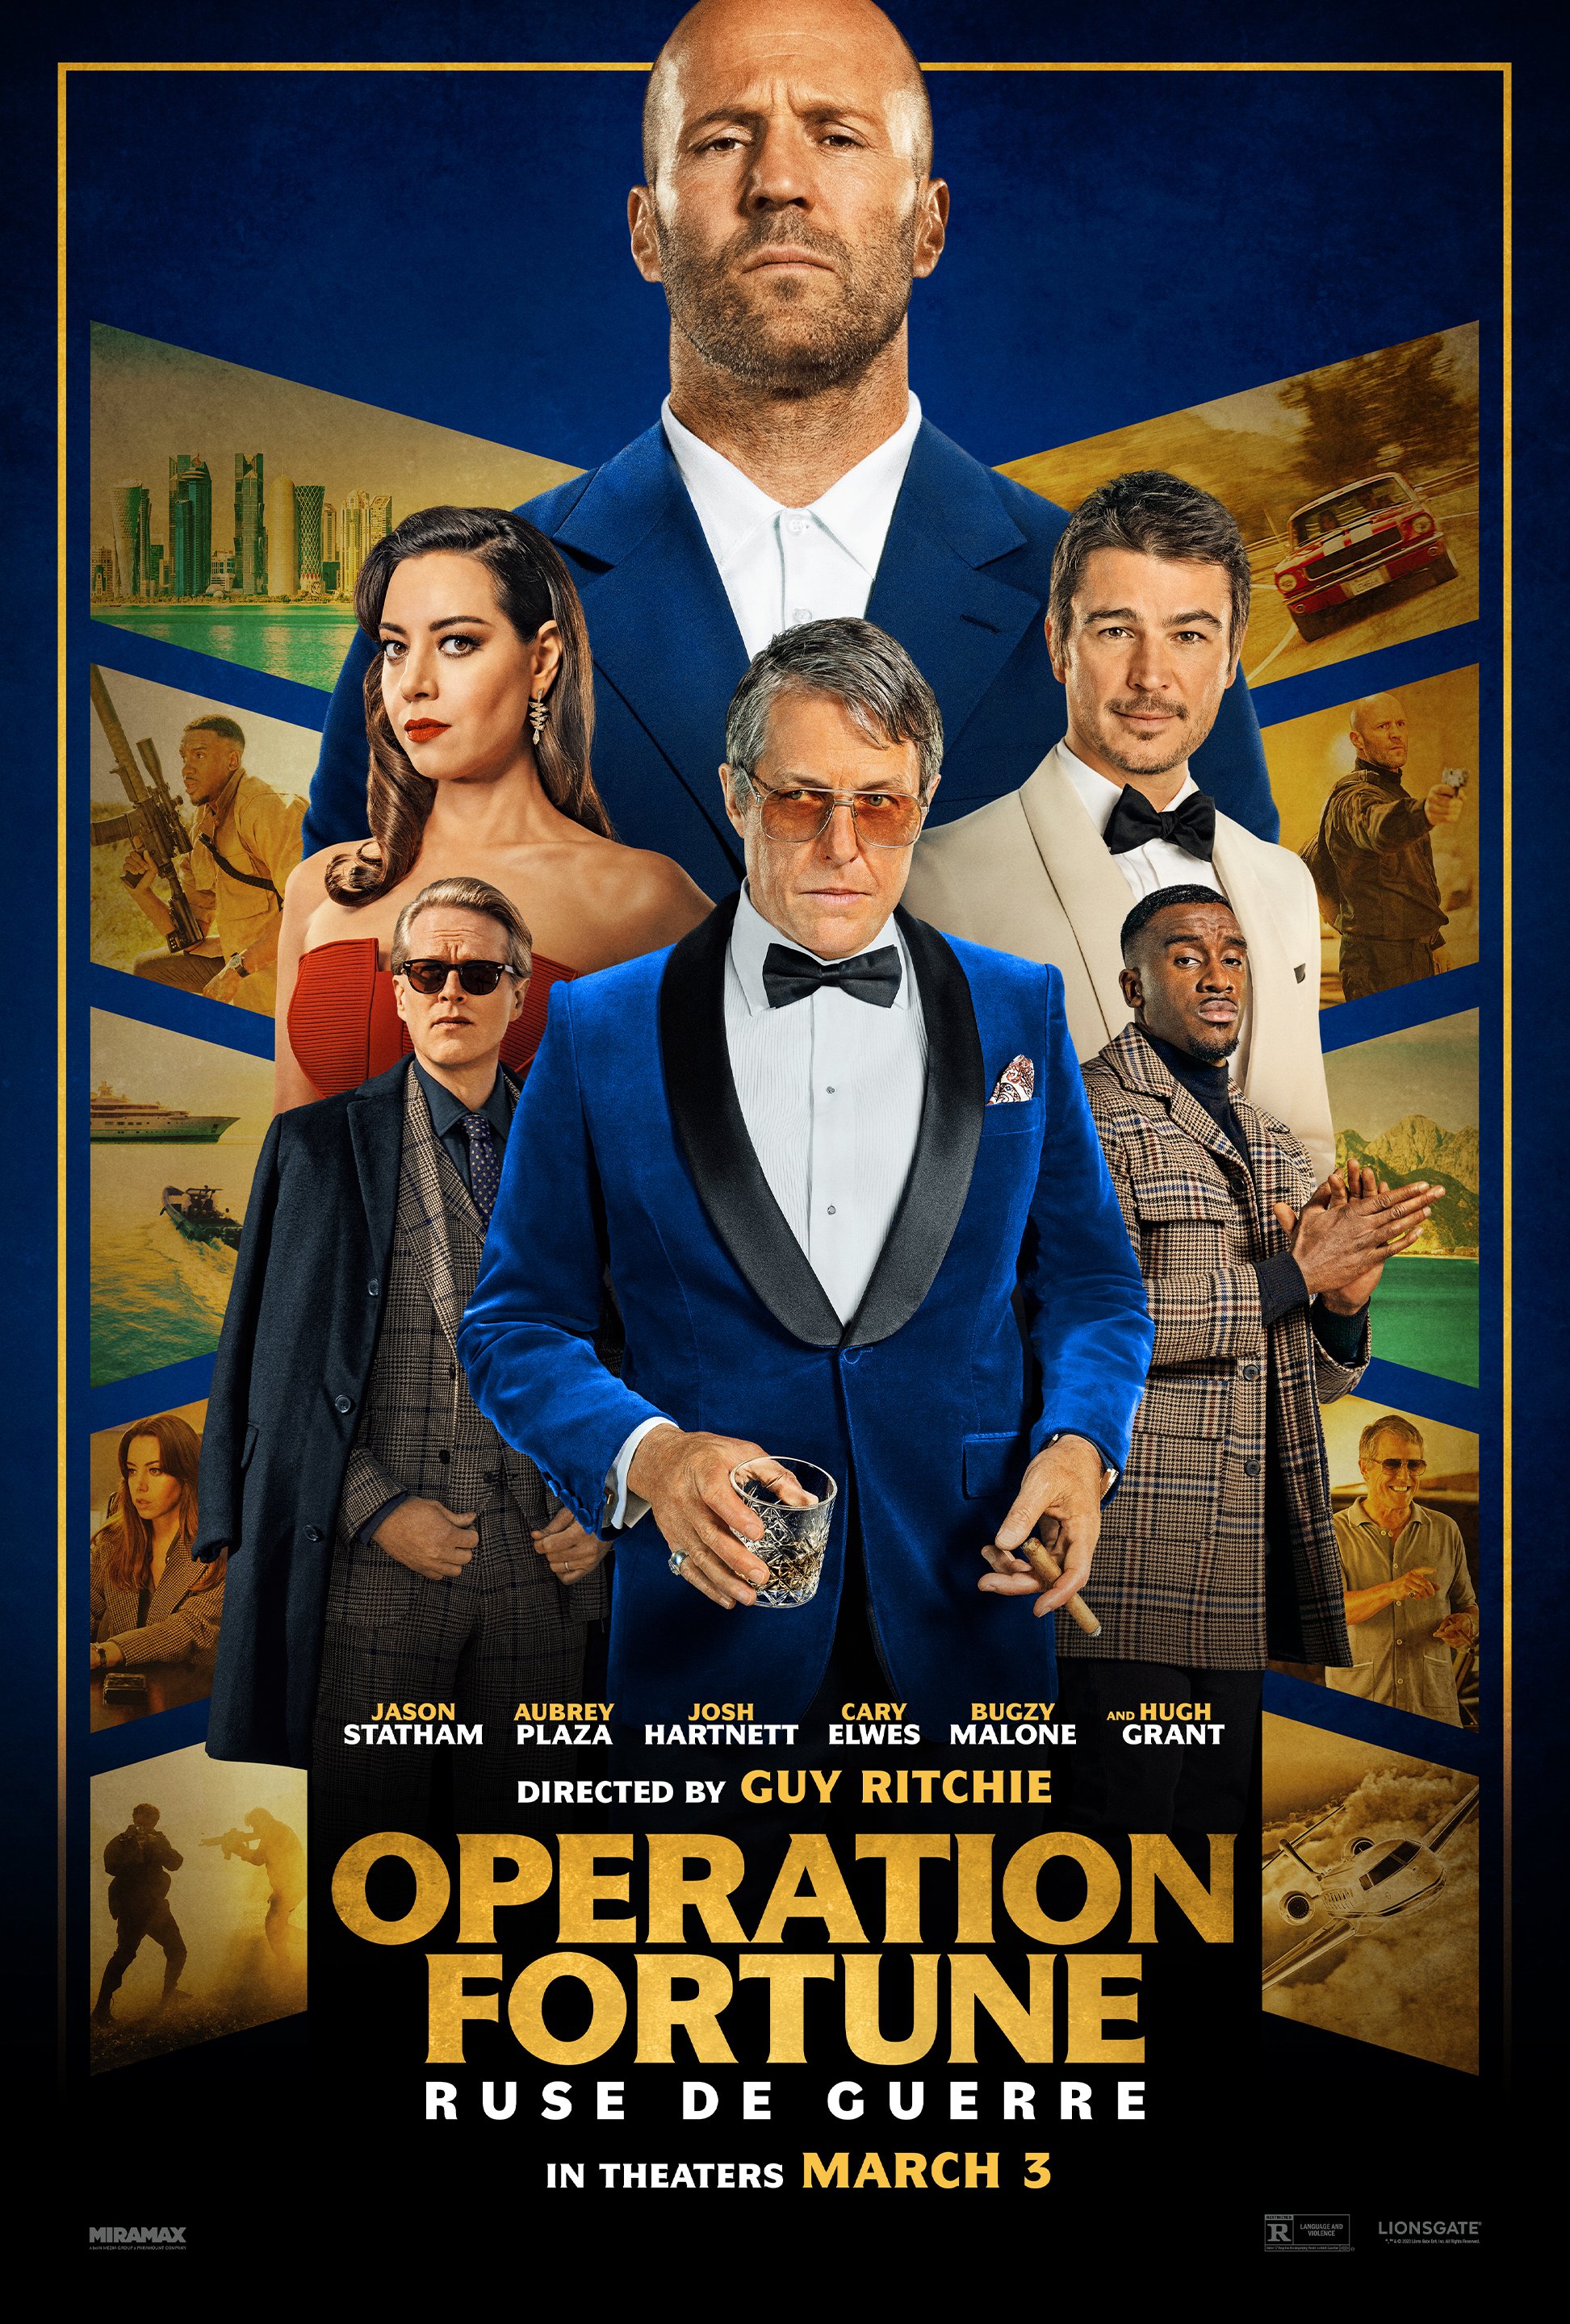 Operation Fortune image © Lionsgate